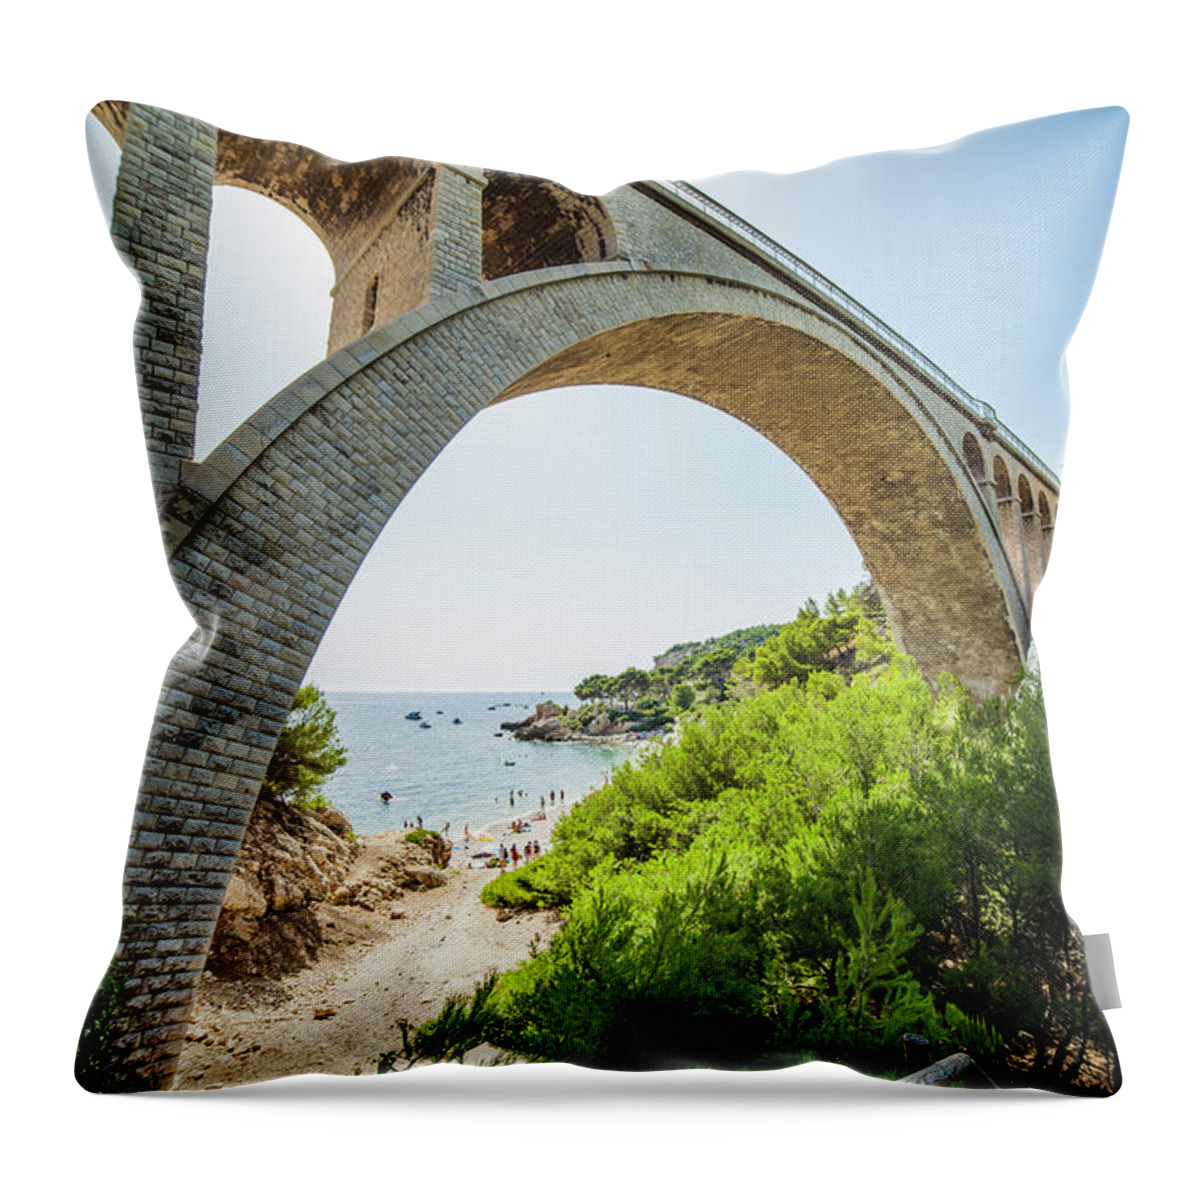 Arch Throw Pillow featuring the photograph Bridge Over The Creek by L. Valencia